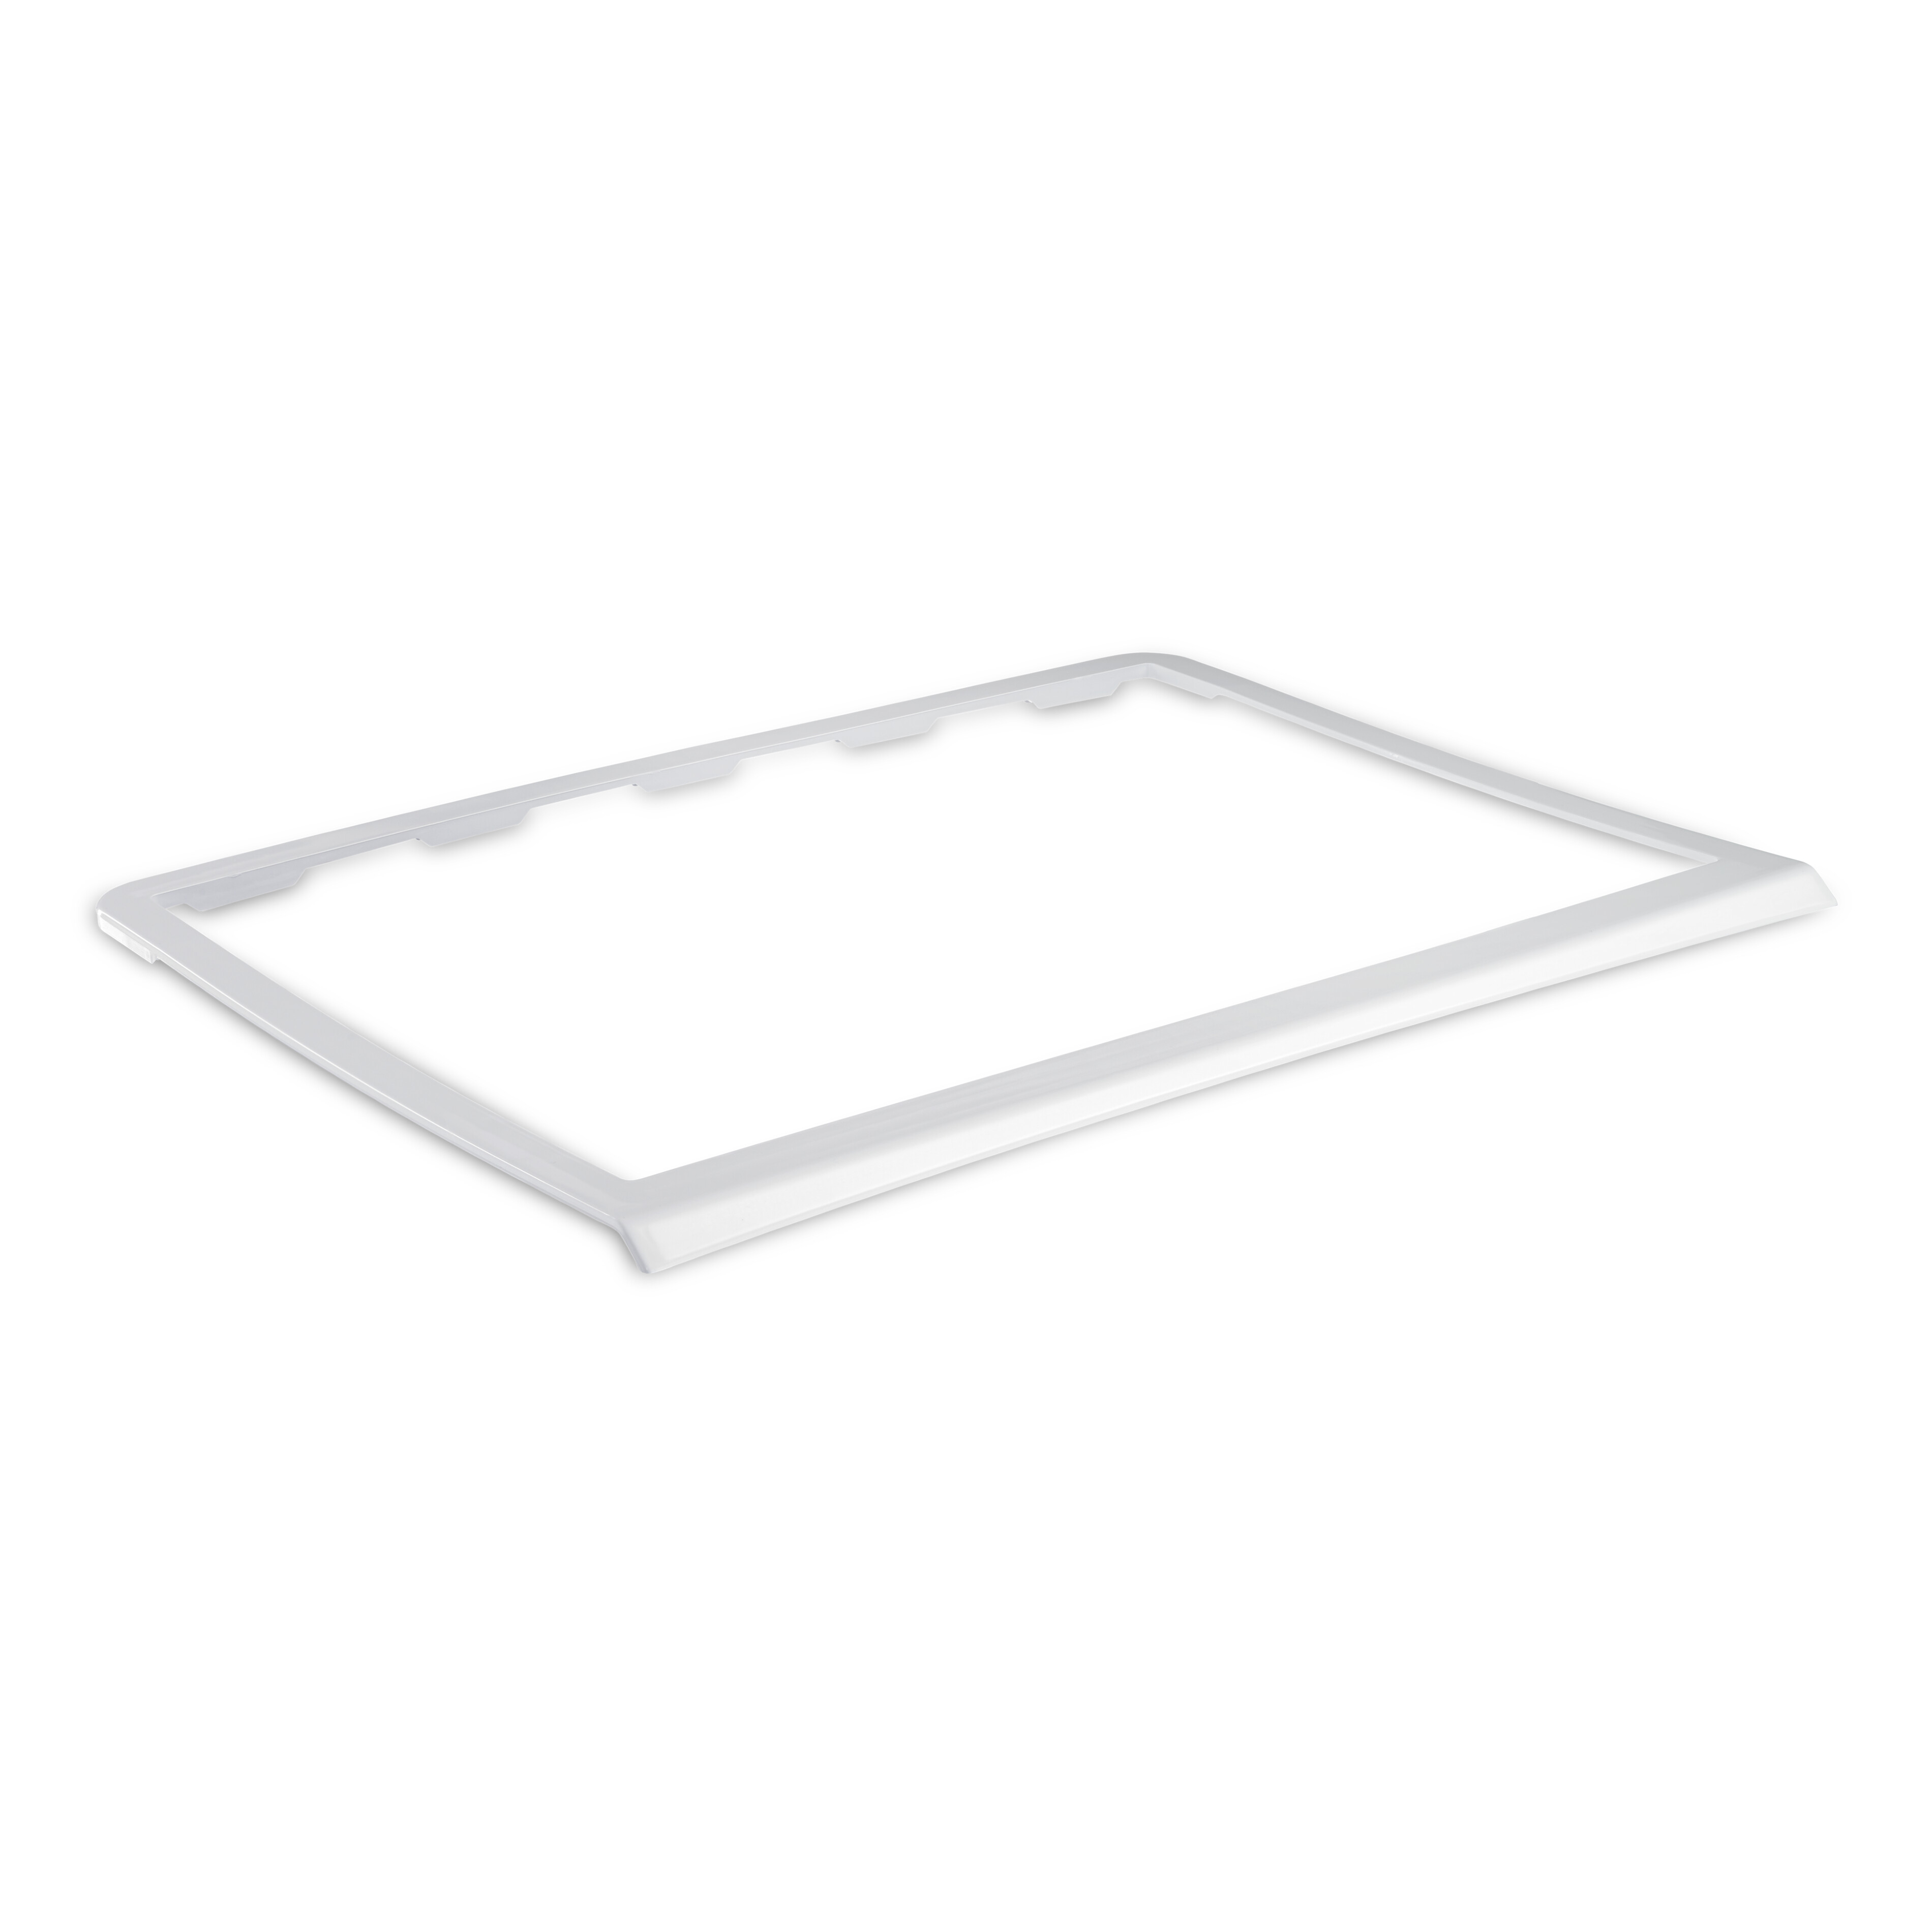 Dometic MIDI HEKI FL (STYLE) 700 x 500 adapter frame for trapezoidal sheet roof, front